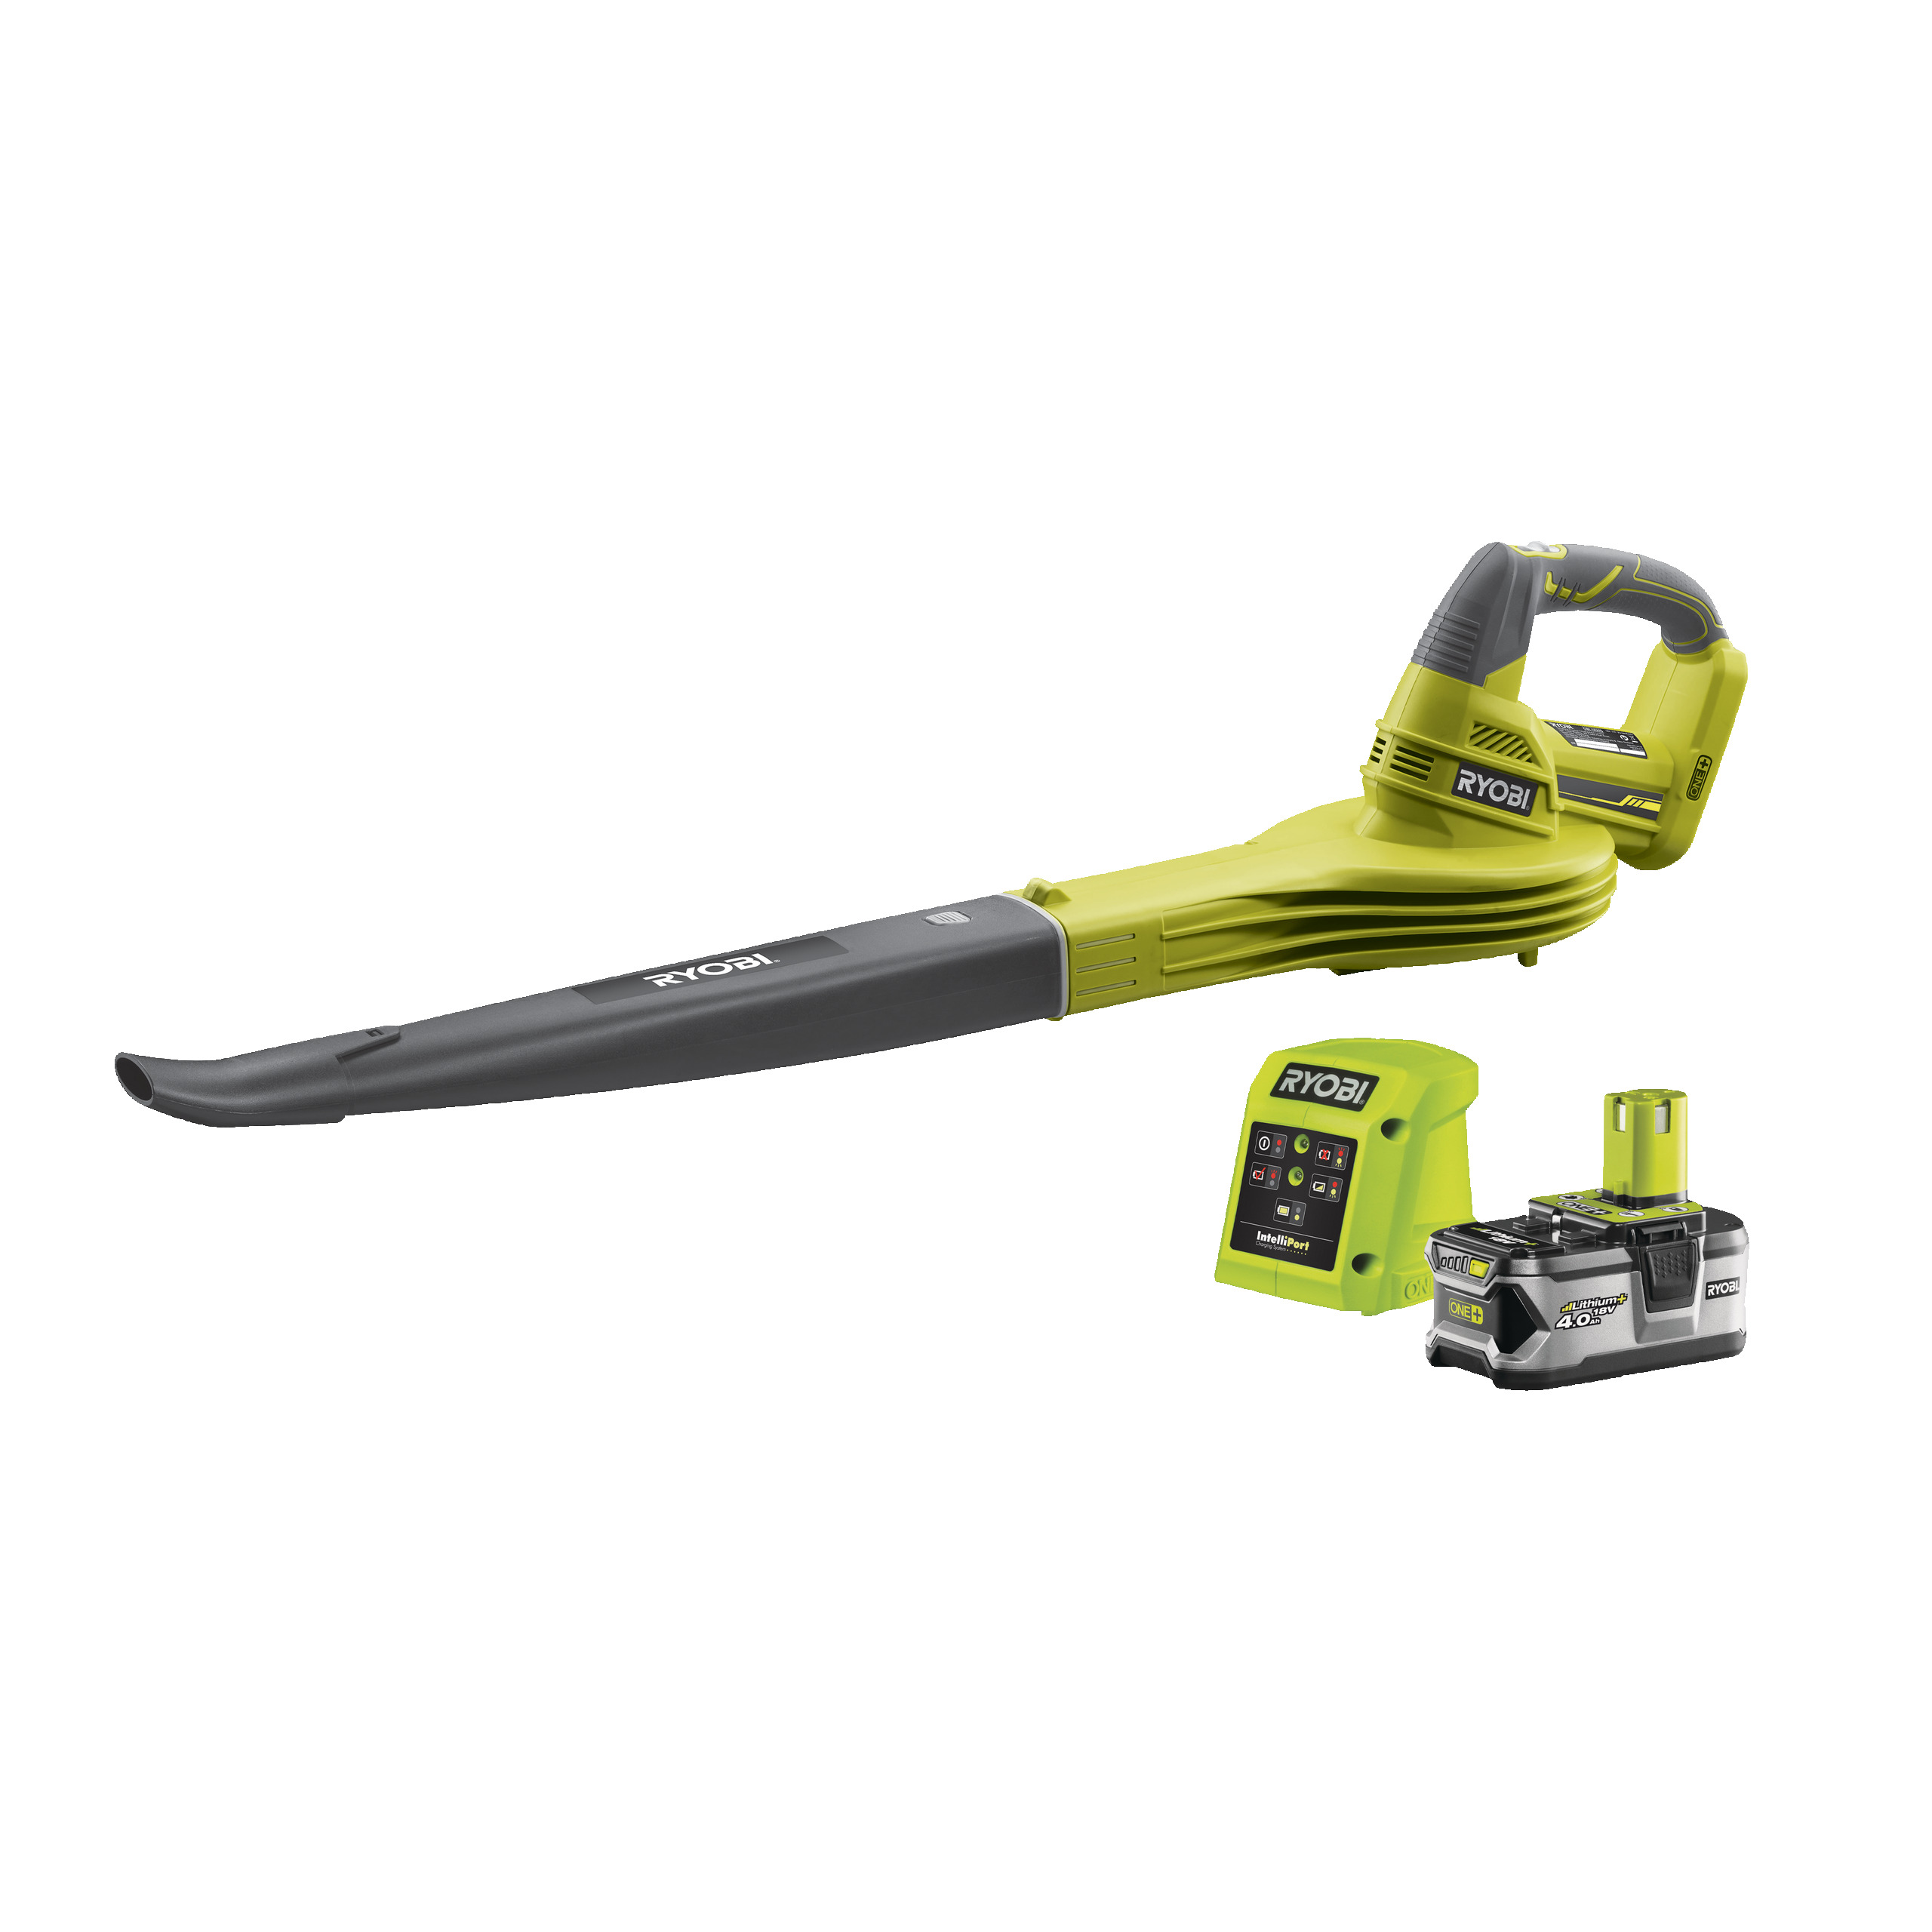 Ryobi 18V ONE Lithium 1 x 4.0Ah 4.0Ah Battery & RB18L40 18V ONE Cordless Lawnmower and Grass Trimmer Kit 